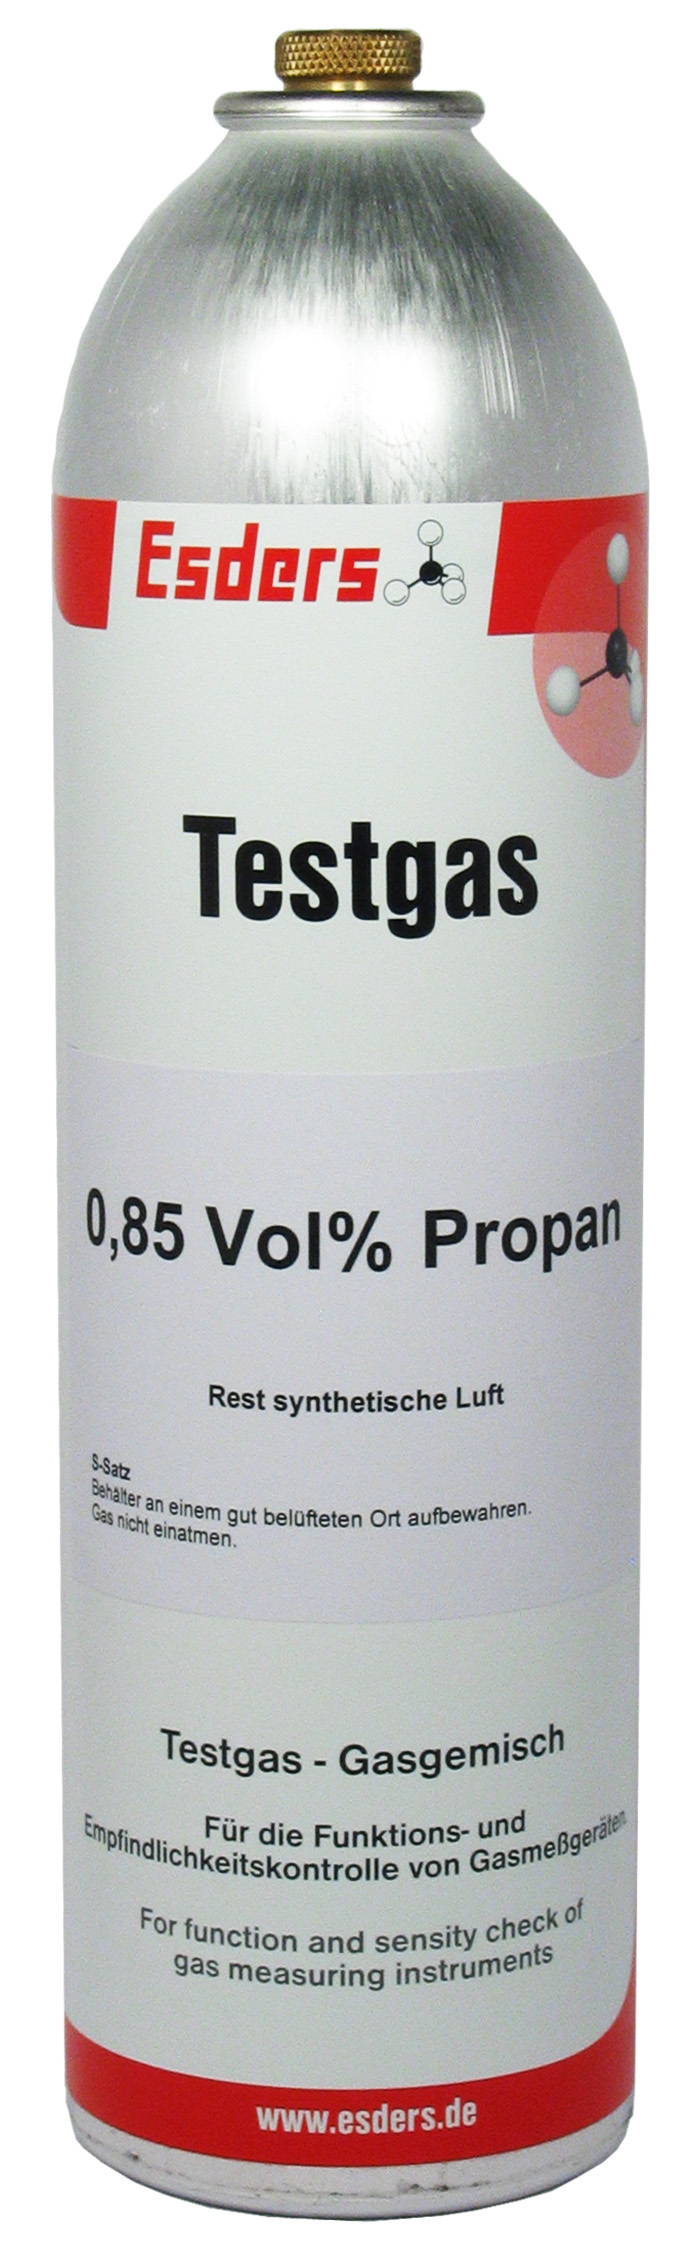 Test gas can 0,85 Vol.% propane 1 l - 12 bar
rest: synthetic air